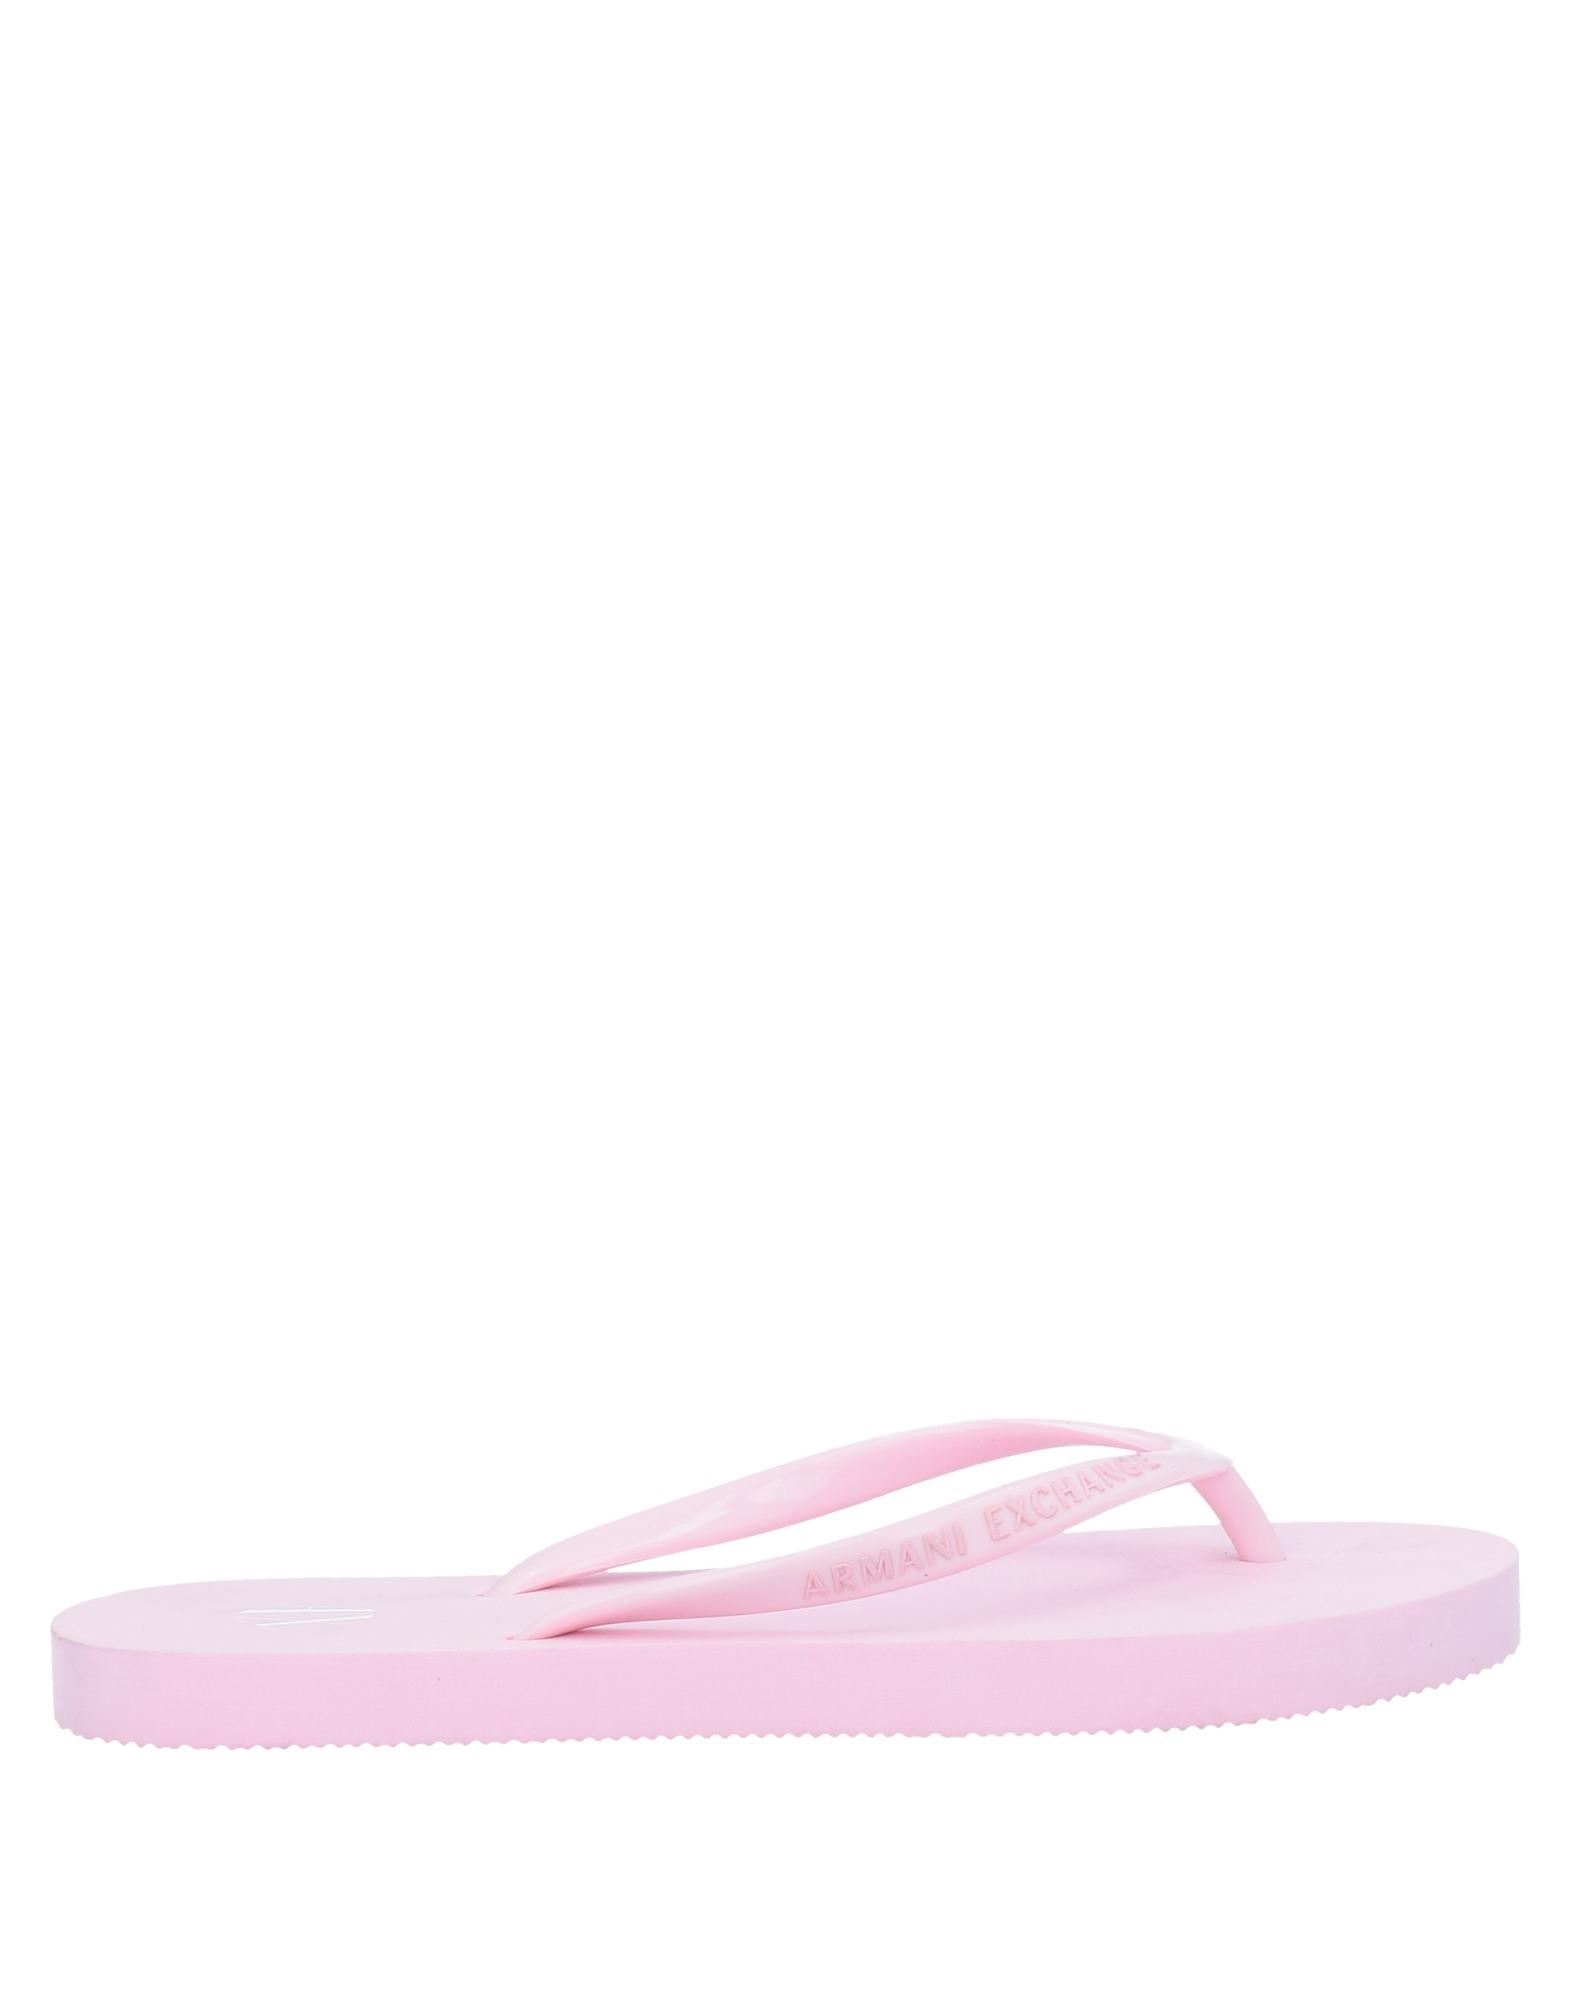 Armani Exchange Toe Strap Sandals In Pink